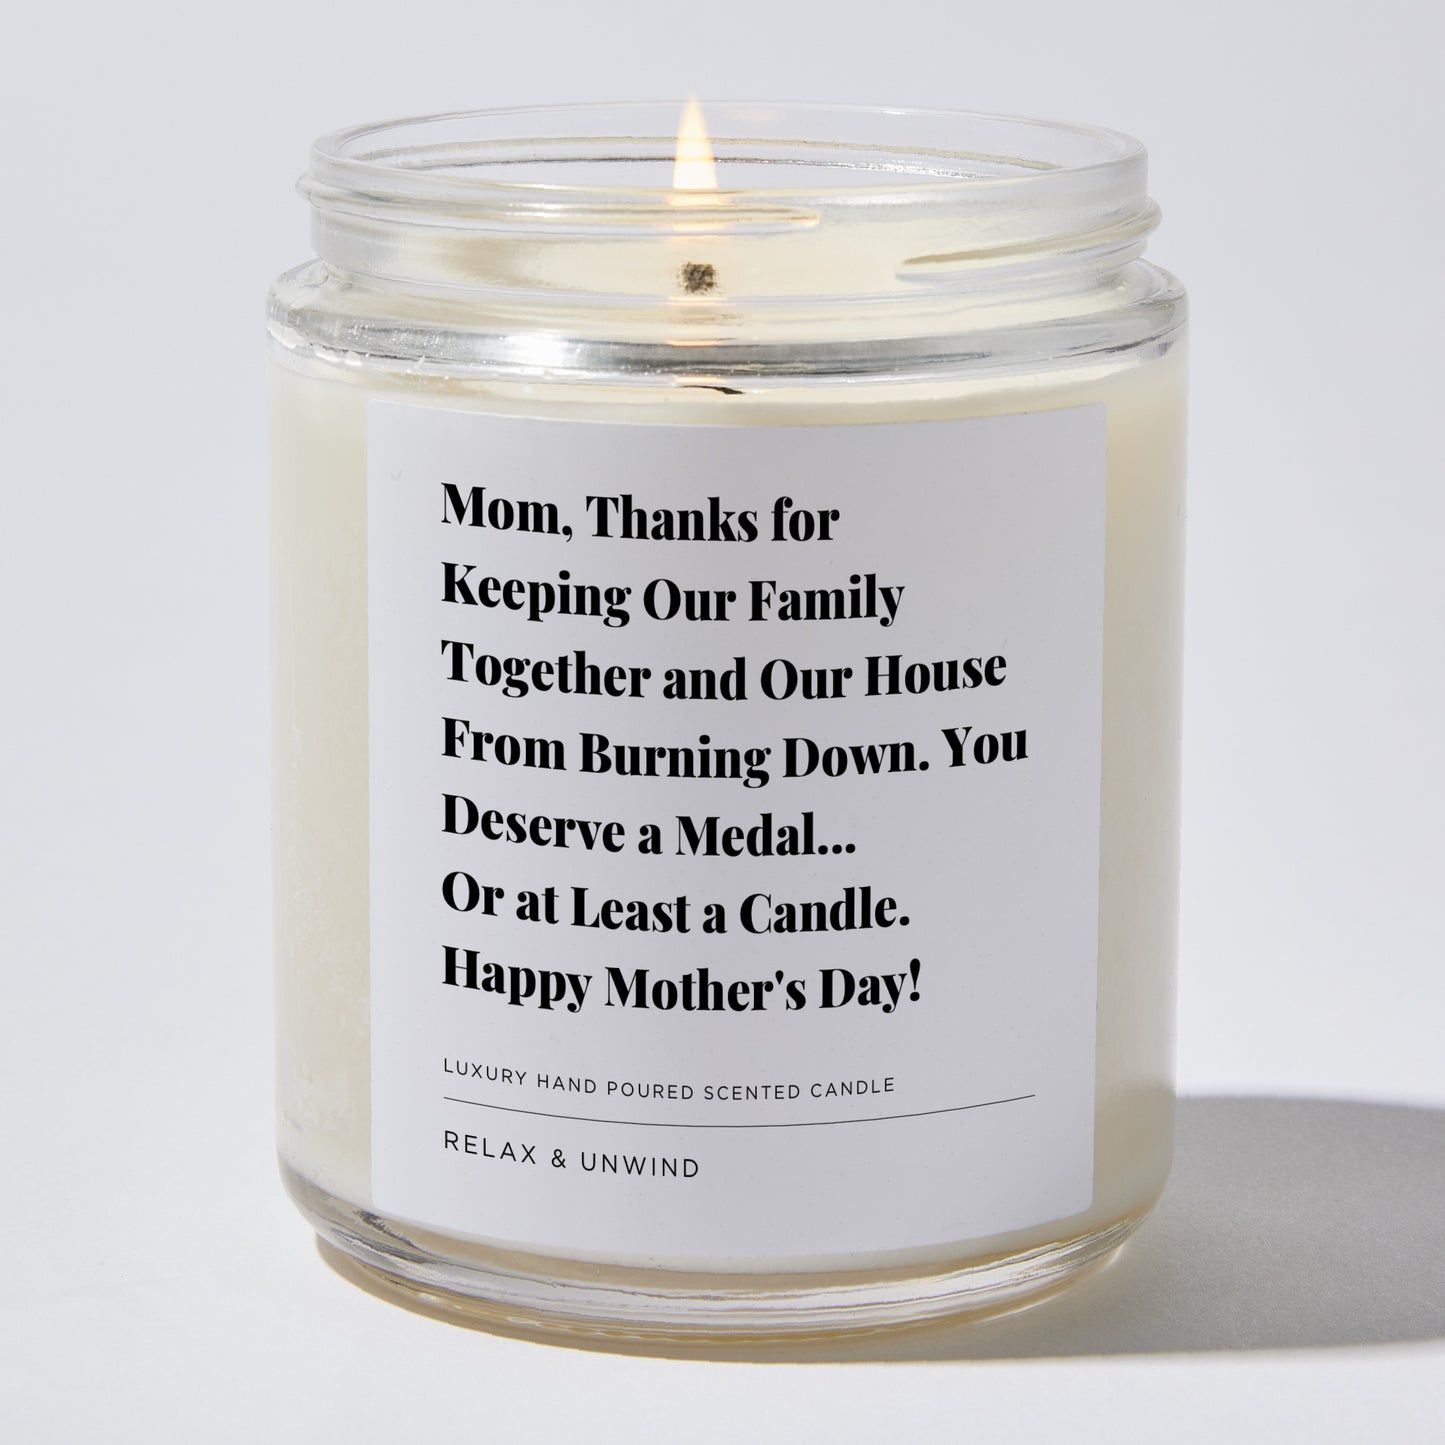 Gift for Mom - Mom, thanks for keeping our family together and our house from burning down. You deserve a medal... or at least a candle. Happy Mother's Day! - Candle